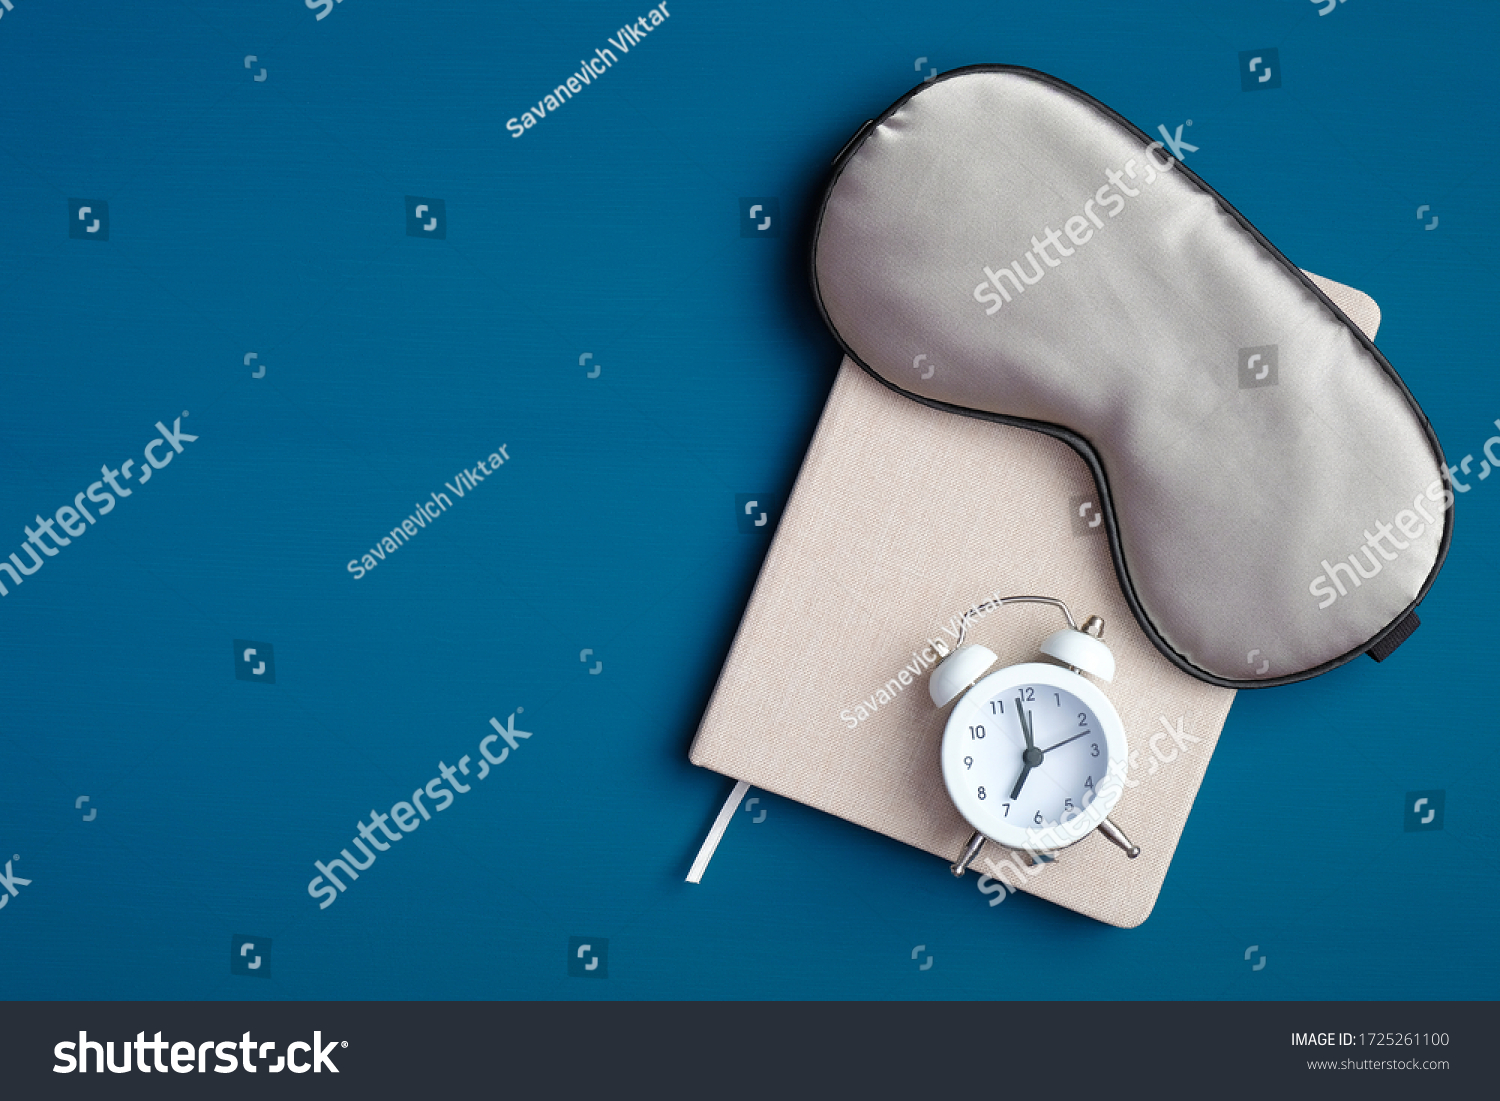 Flat lay composition with sleep eye mask, dream book and alarm clock on dark blue background. Healthy sleeping concept. #1725261100